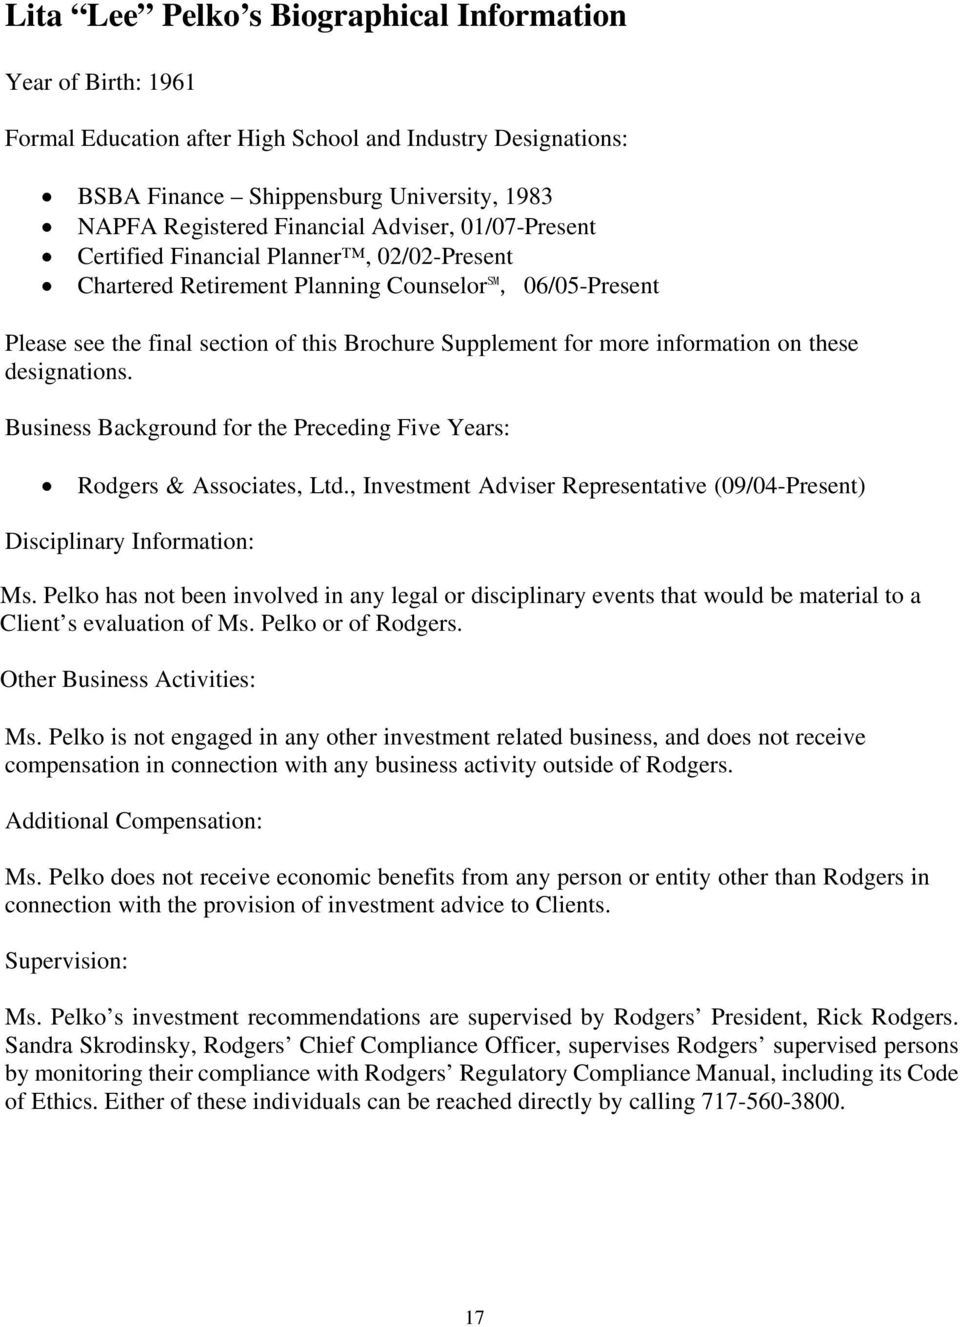 on these designations. Business Background for the Preceding Five Years: Rodgers & Associates, Ltd., Investment Adviser Representative (09/04-Present) Disciplinary Information: Ms.